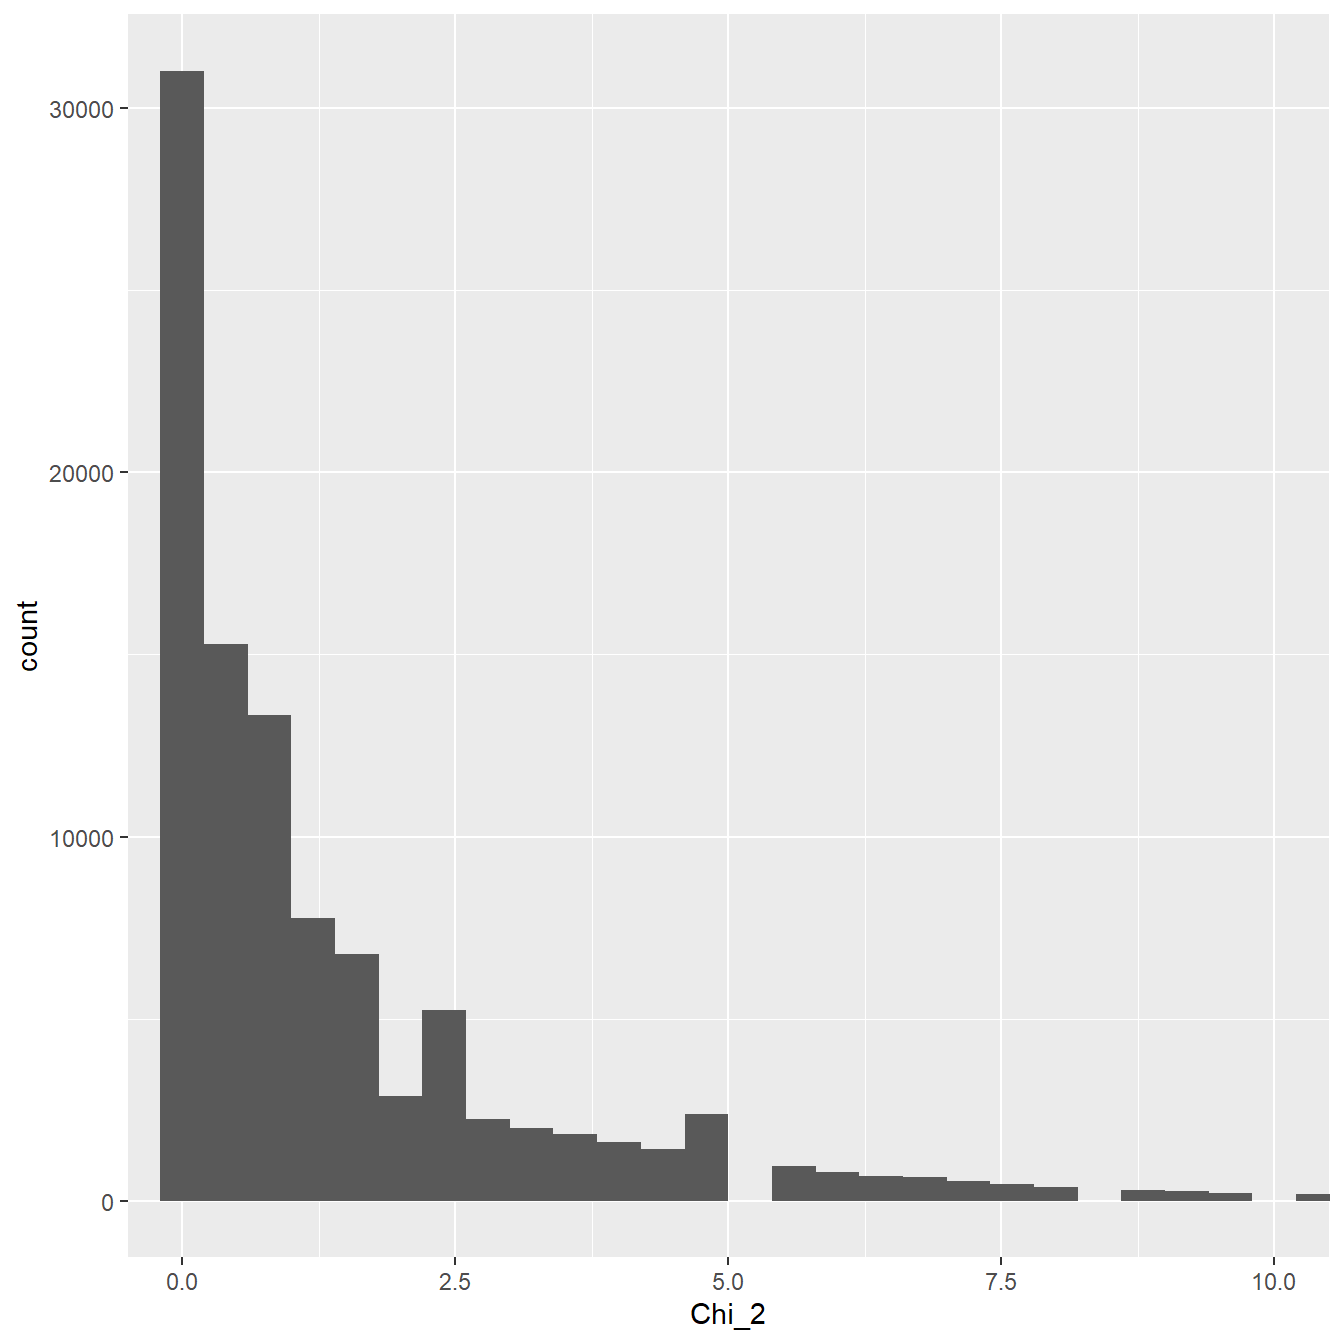 Distribution of the test statistic